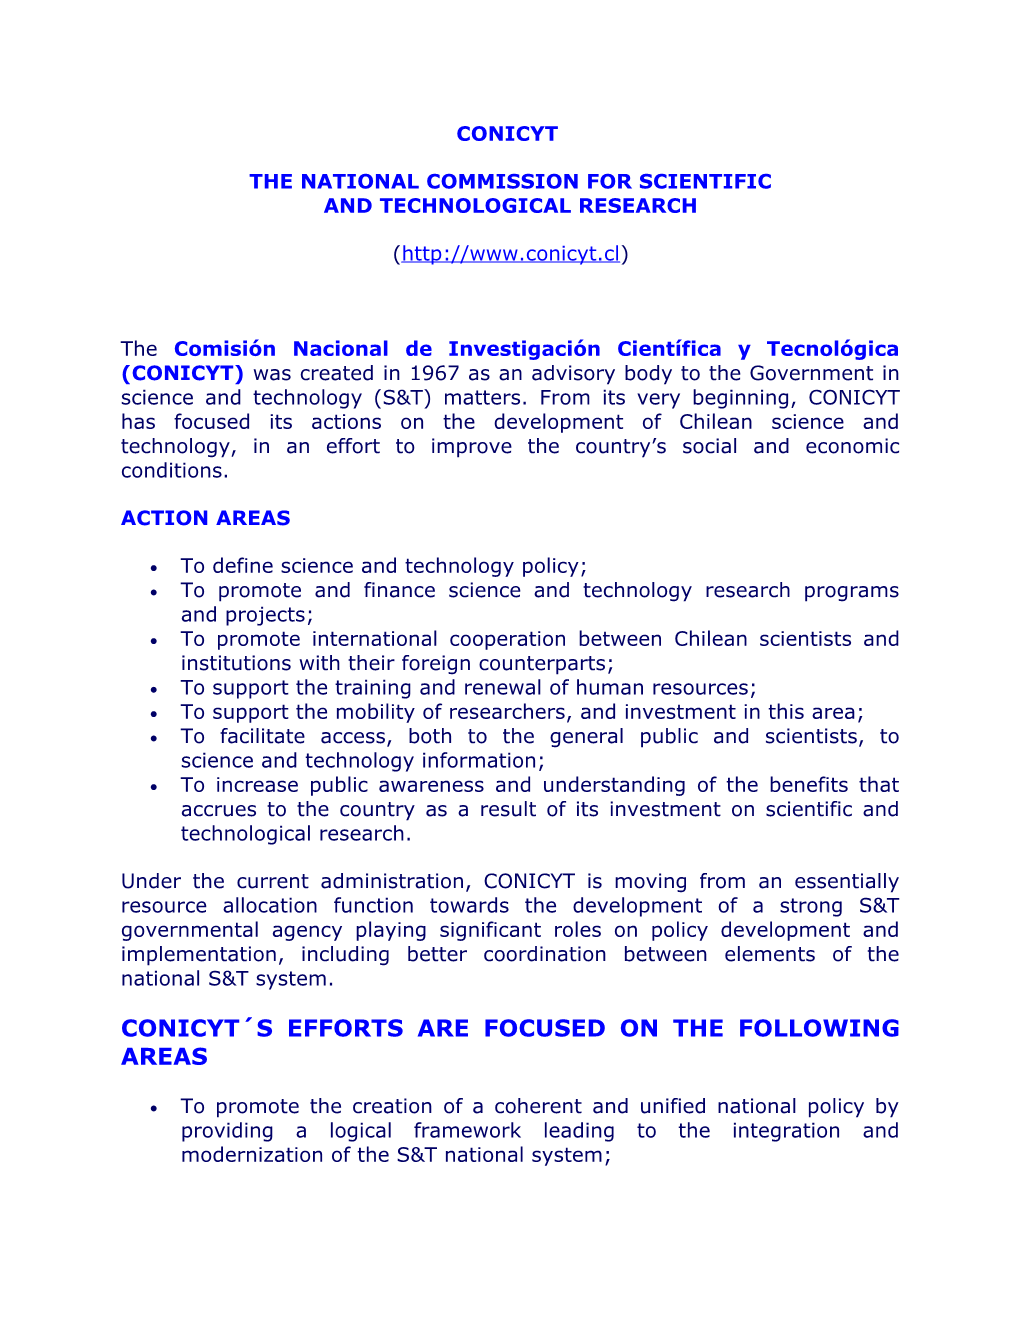 Conicyt: the National Commission for Scientific